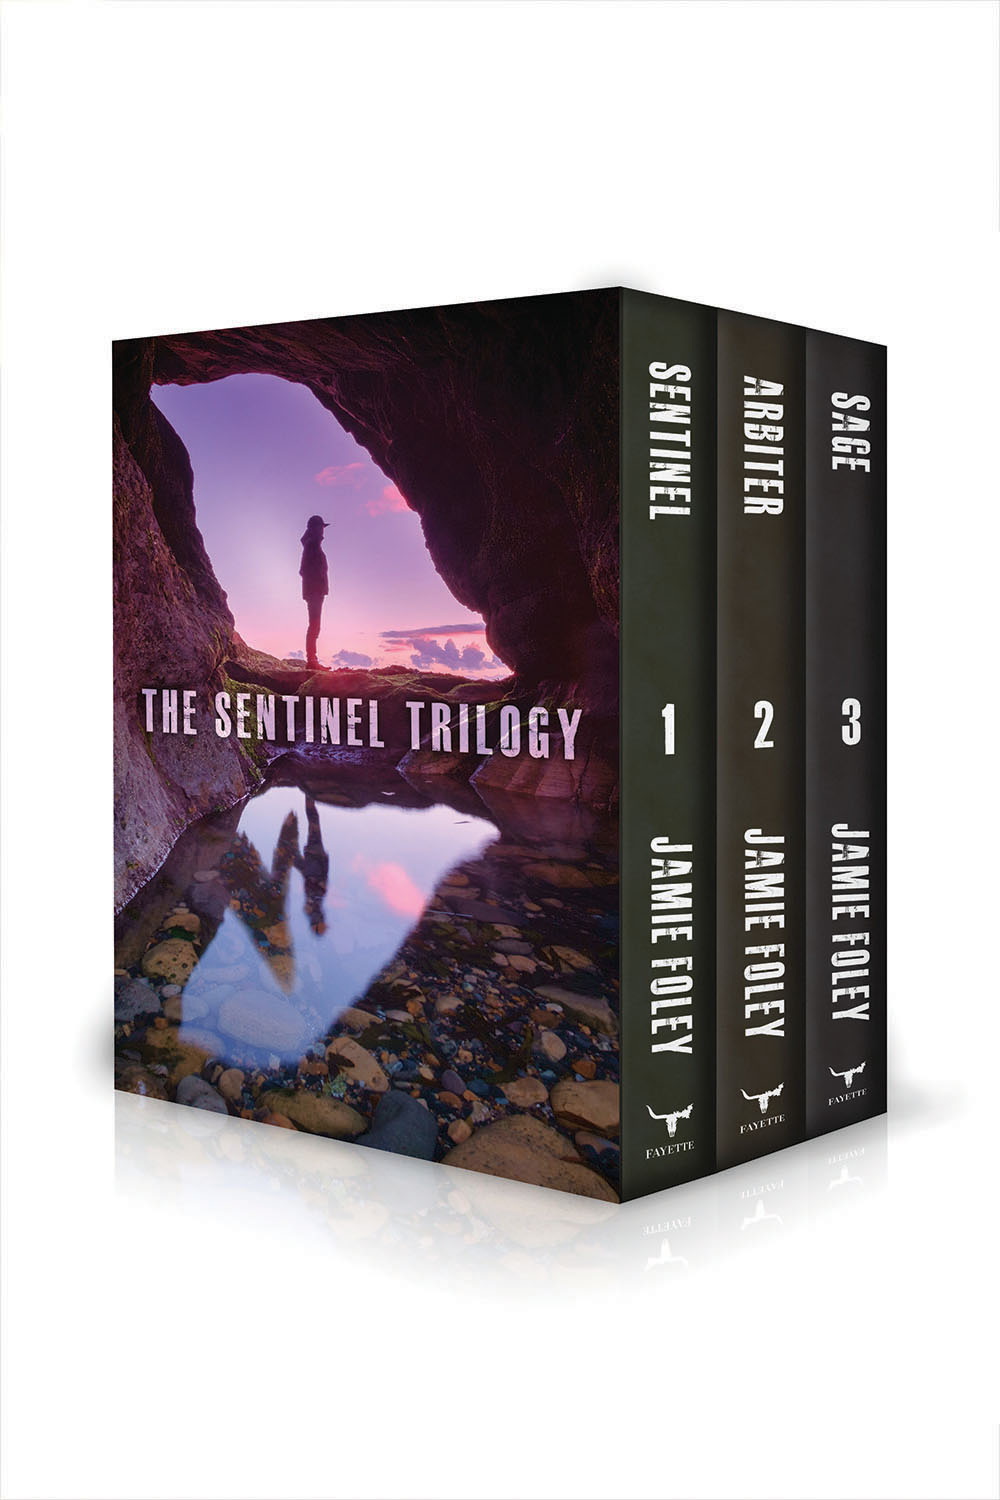 The Sentinel Trilogy